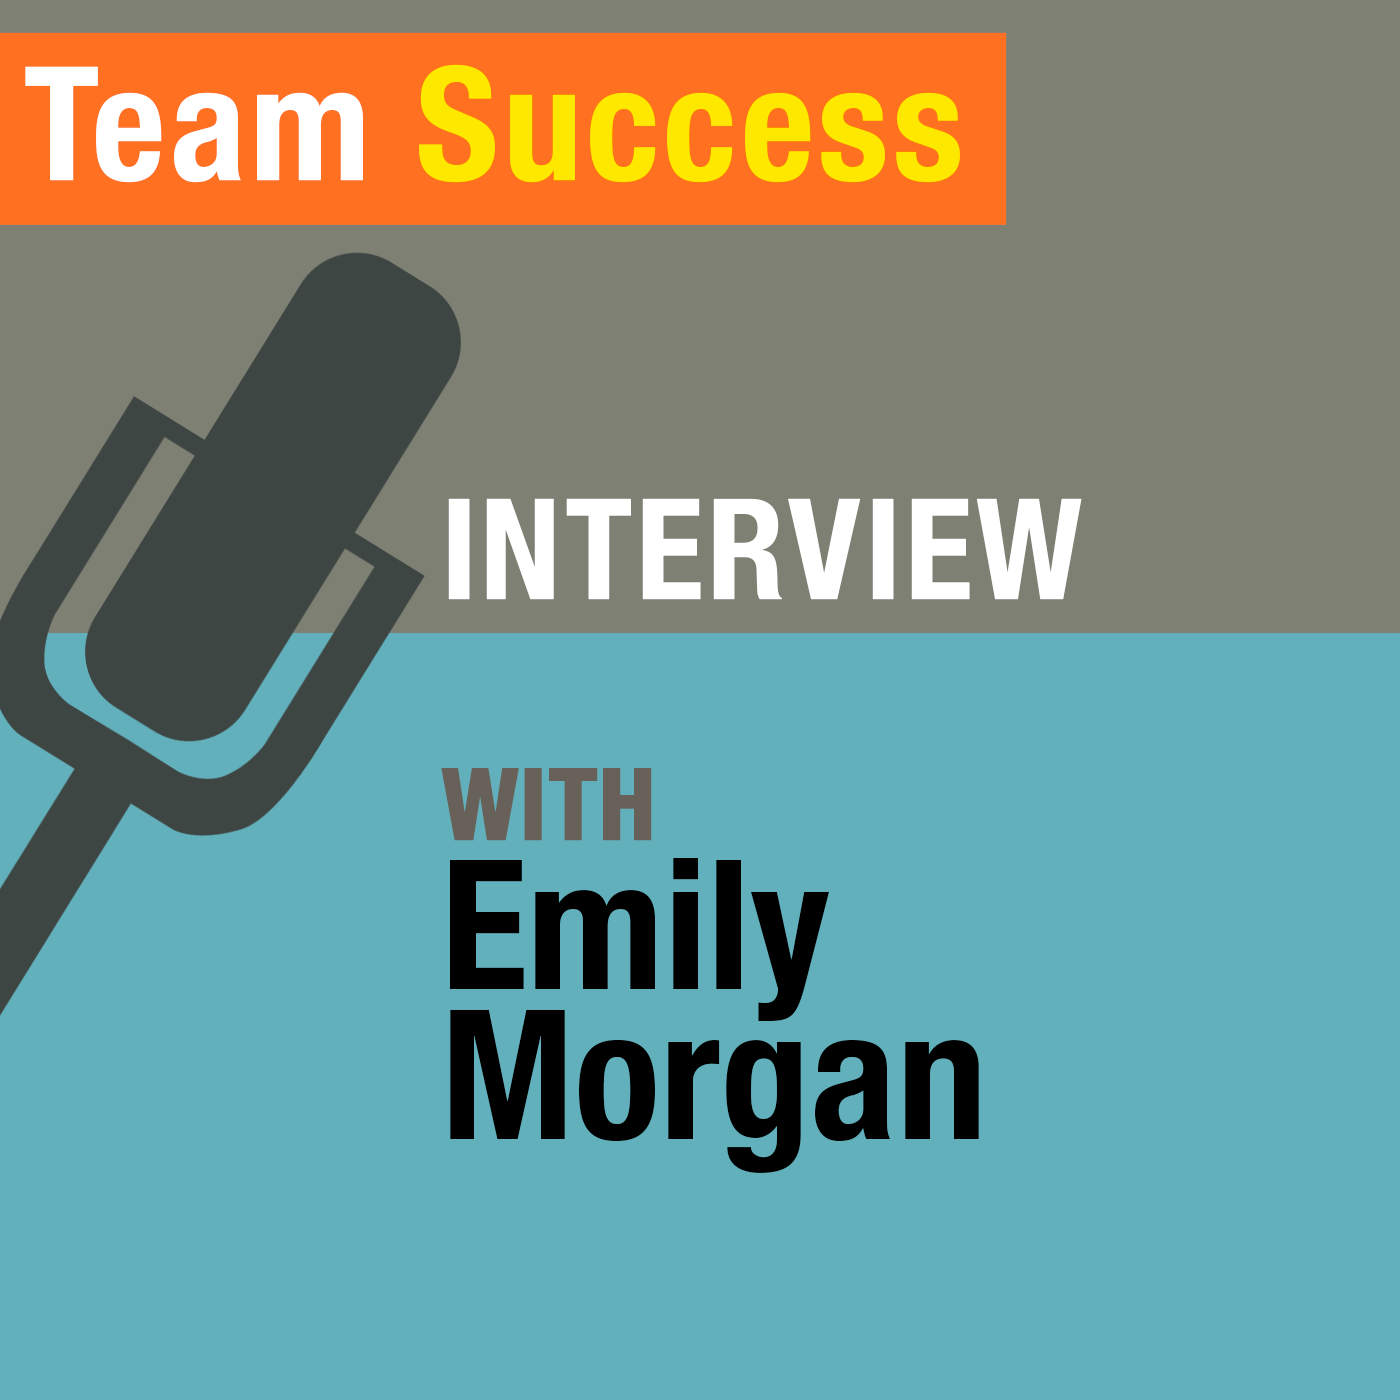 Interview With Emily Morgan - Team Success Podcast